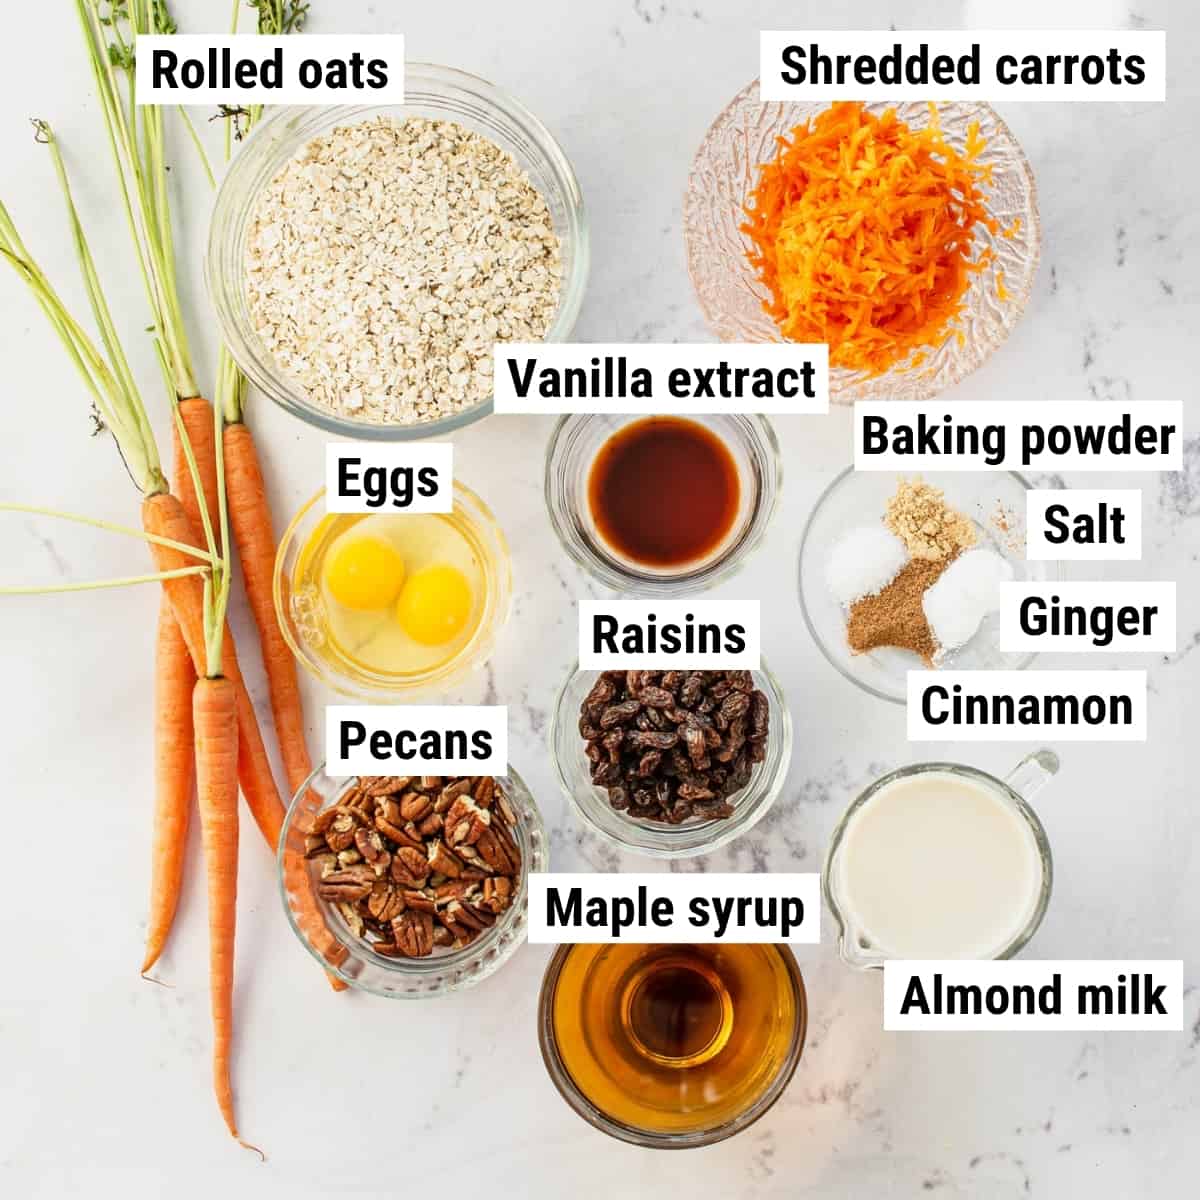 The ingredients to make carrot cake oatmeal spread out on a table.